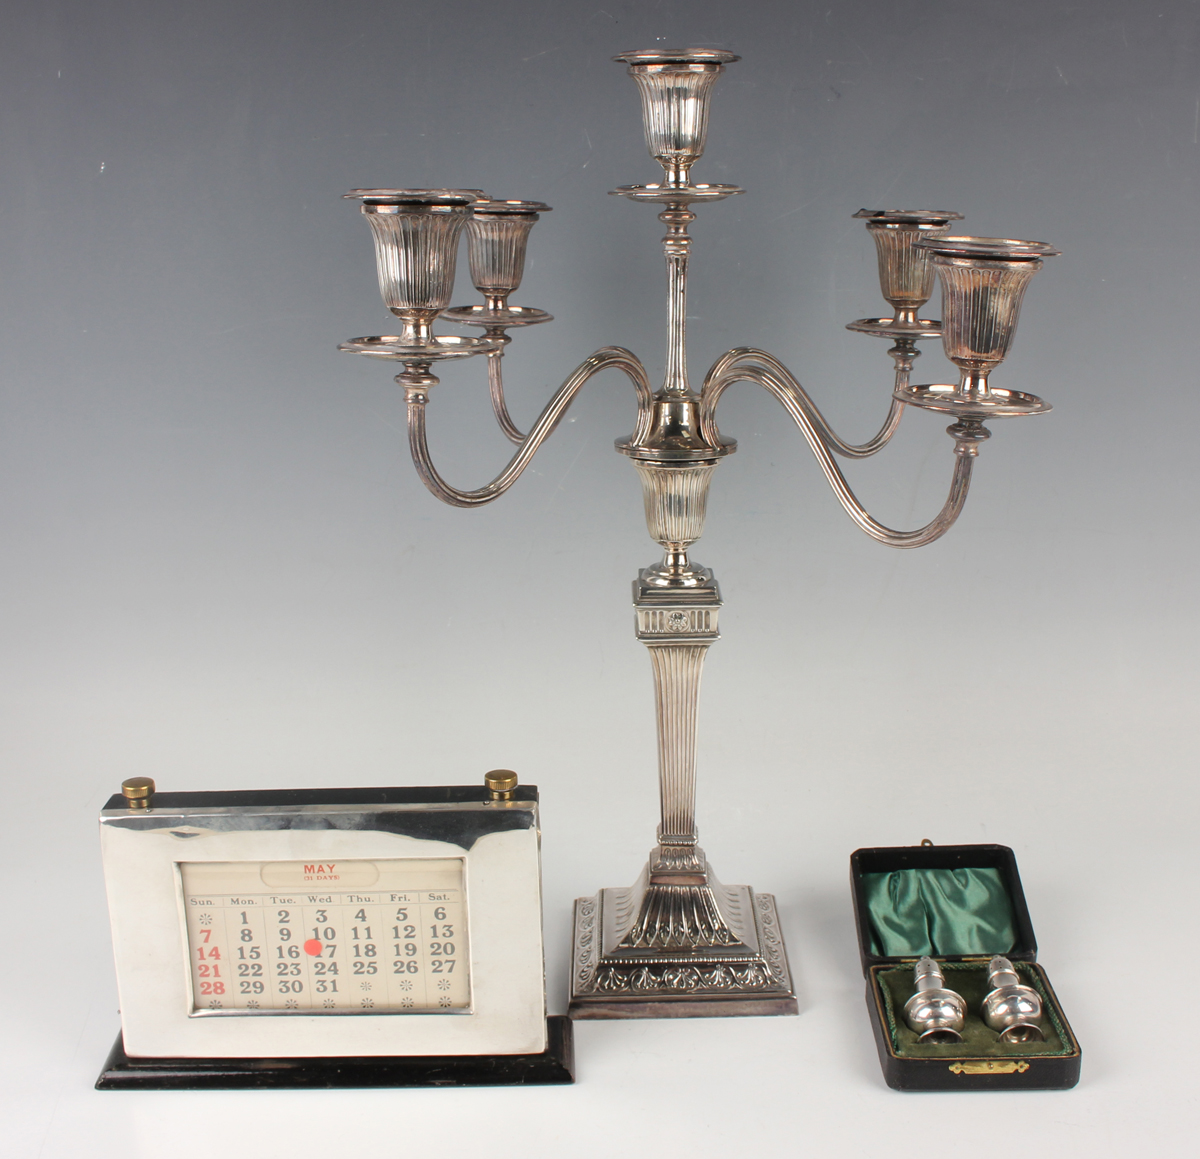 A pair of George V silver pepper casters, Birmingham 1912 by E.J. Houlston, weight 16.3g, height 5.